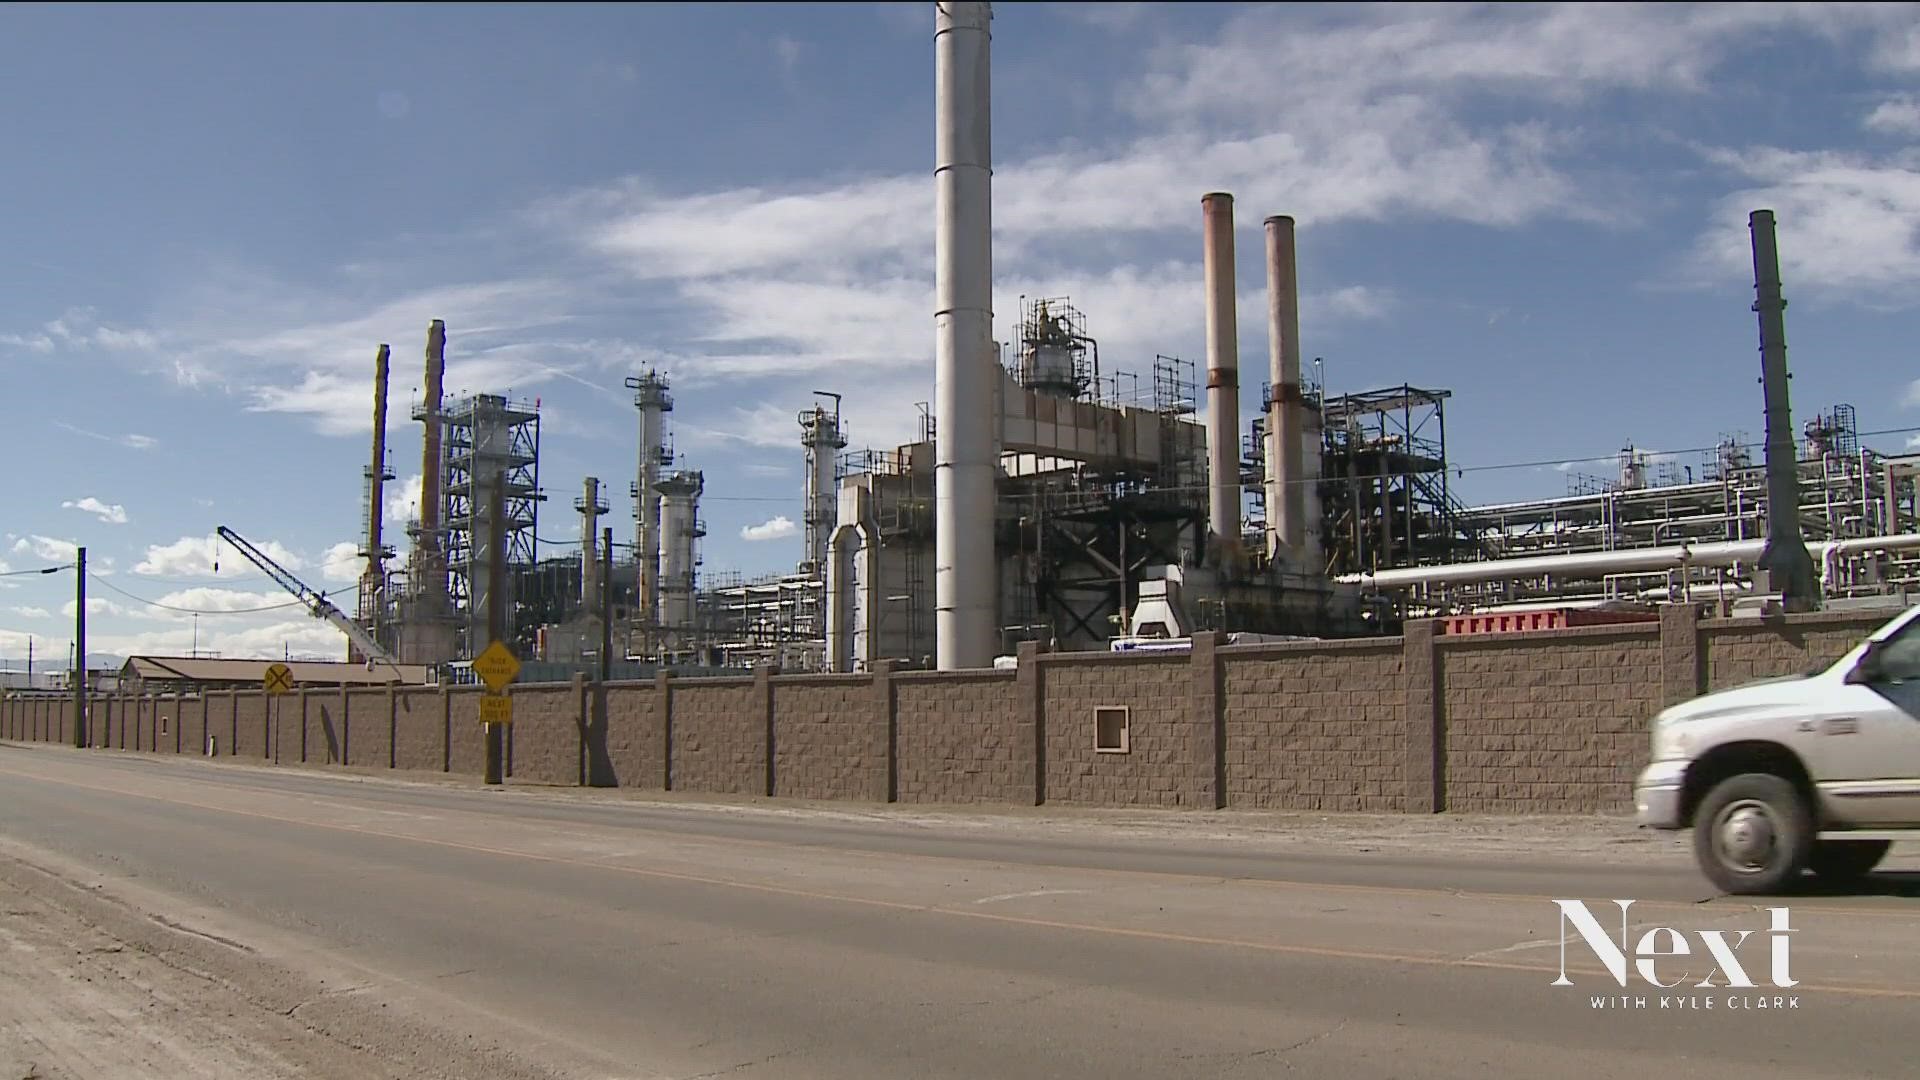 A "vapor release" on Tuesday was one in a string of recent incidents reported by the refinery in Commerce City.